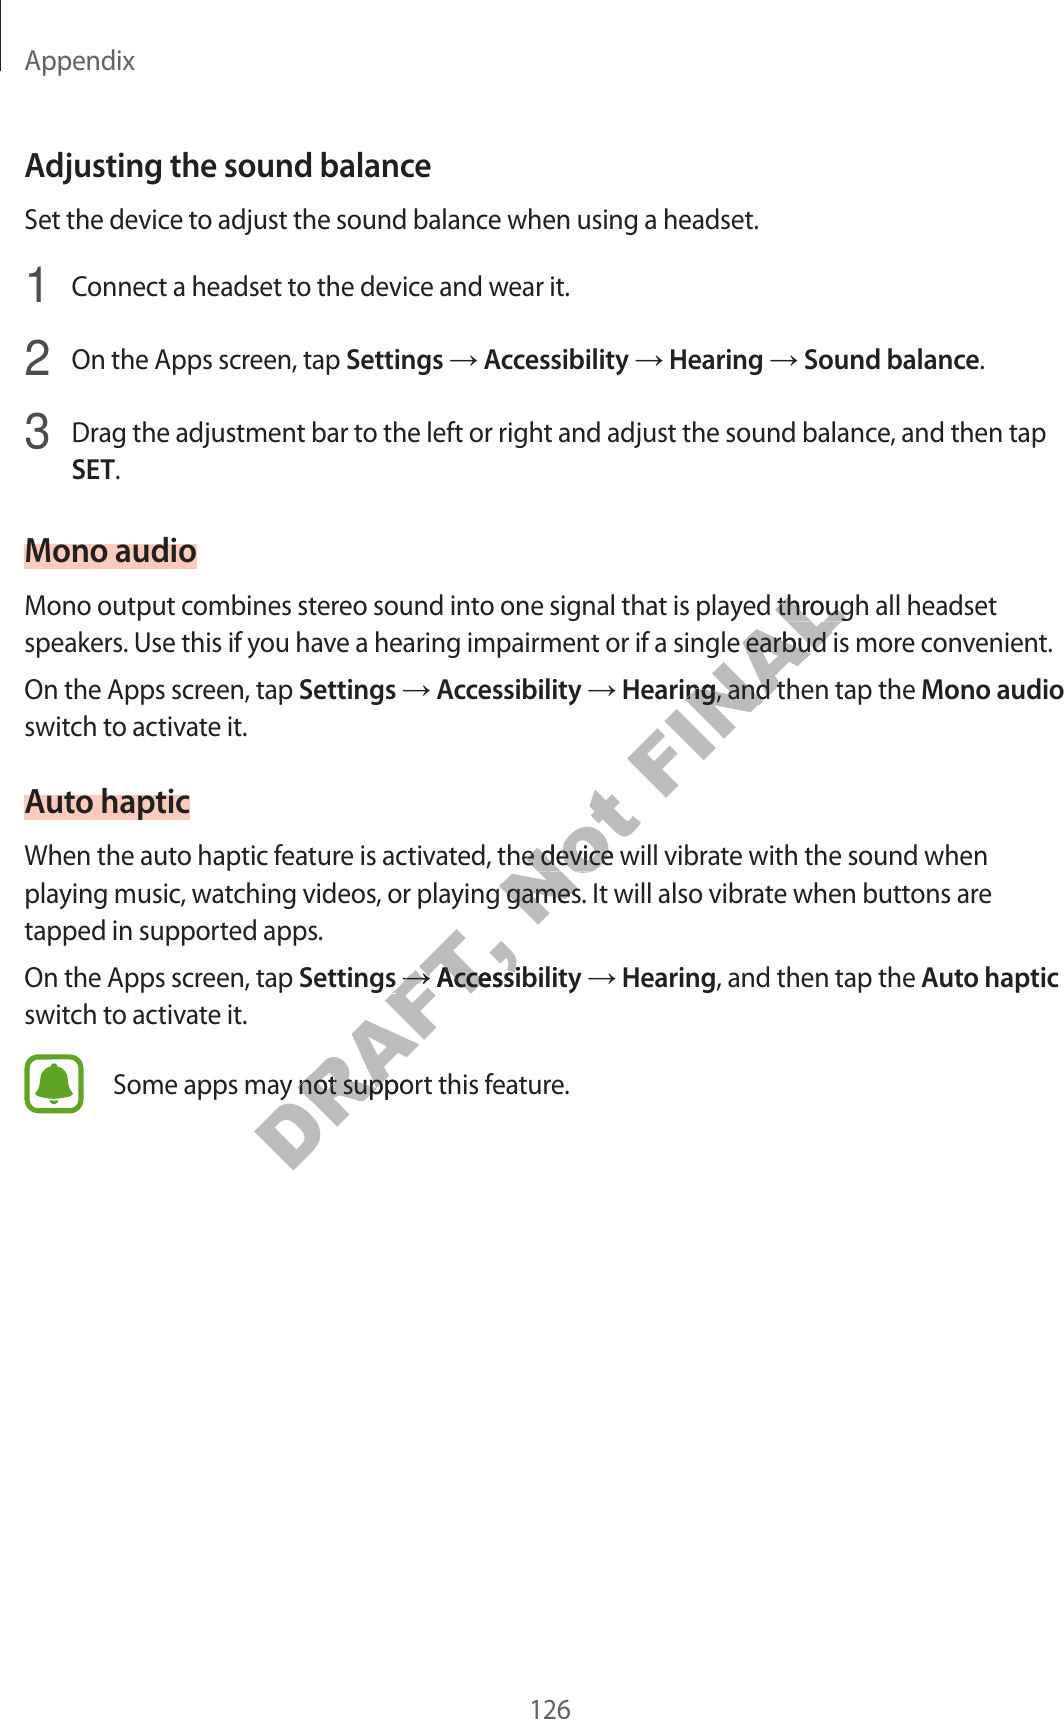 Appendix126Adjusting the sound balanceSet the device to adjust the sound balance when using a headset.1  Connect a headset to the device and wear it.2  On the Apps screen, tap Settings  Accessibility  Hearing  Sound balance.3  Drag the adjustment bar to the left or right and adjust the sound balance, and then tap SET.Mono audioMono output combines stereo sound into one signal that is played through all headset speakers. Use this if you have a hearing impairment or if a single earbud is more convenient.On the Apps screen, tap Settings  Accessibility  Hearing, and then tap the Mono audio switch to activate it.Auto hapticWhen the auto haptic feature is activated, the device will vibrate with the sound when playing music, watching videos, or playing games. It will also vibrate when buttons are tapped in supported apps.On the Apps screen, tap Settings  Accessibility  Hearing, and then tap the Auto haptic switch to activate it.Some apps may not support this feature.DRAFT, ying gamesettingsettingsDRAFT, AccessibilitAccessibilitome apps may not supporome apps may not supporNot , the device will vibr, the device will vibrying games. Iying games. IFINALed through all headseted through all headsett or if a single earbud is mort or if a single earbud is morHearingHearing, and then tap the , and then tap the 